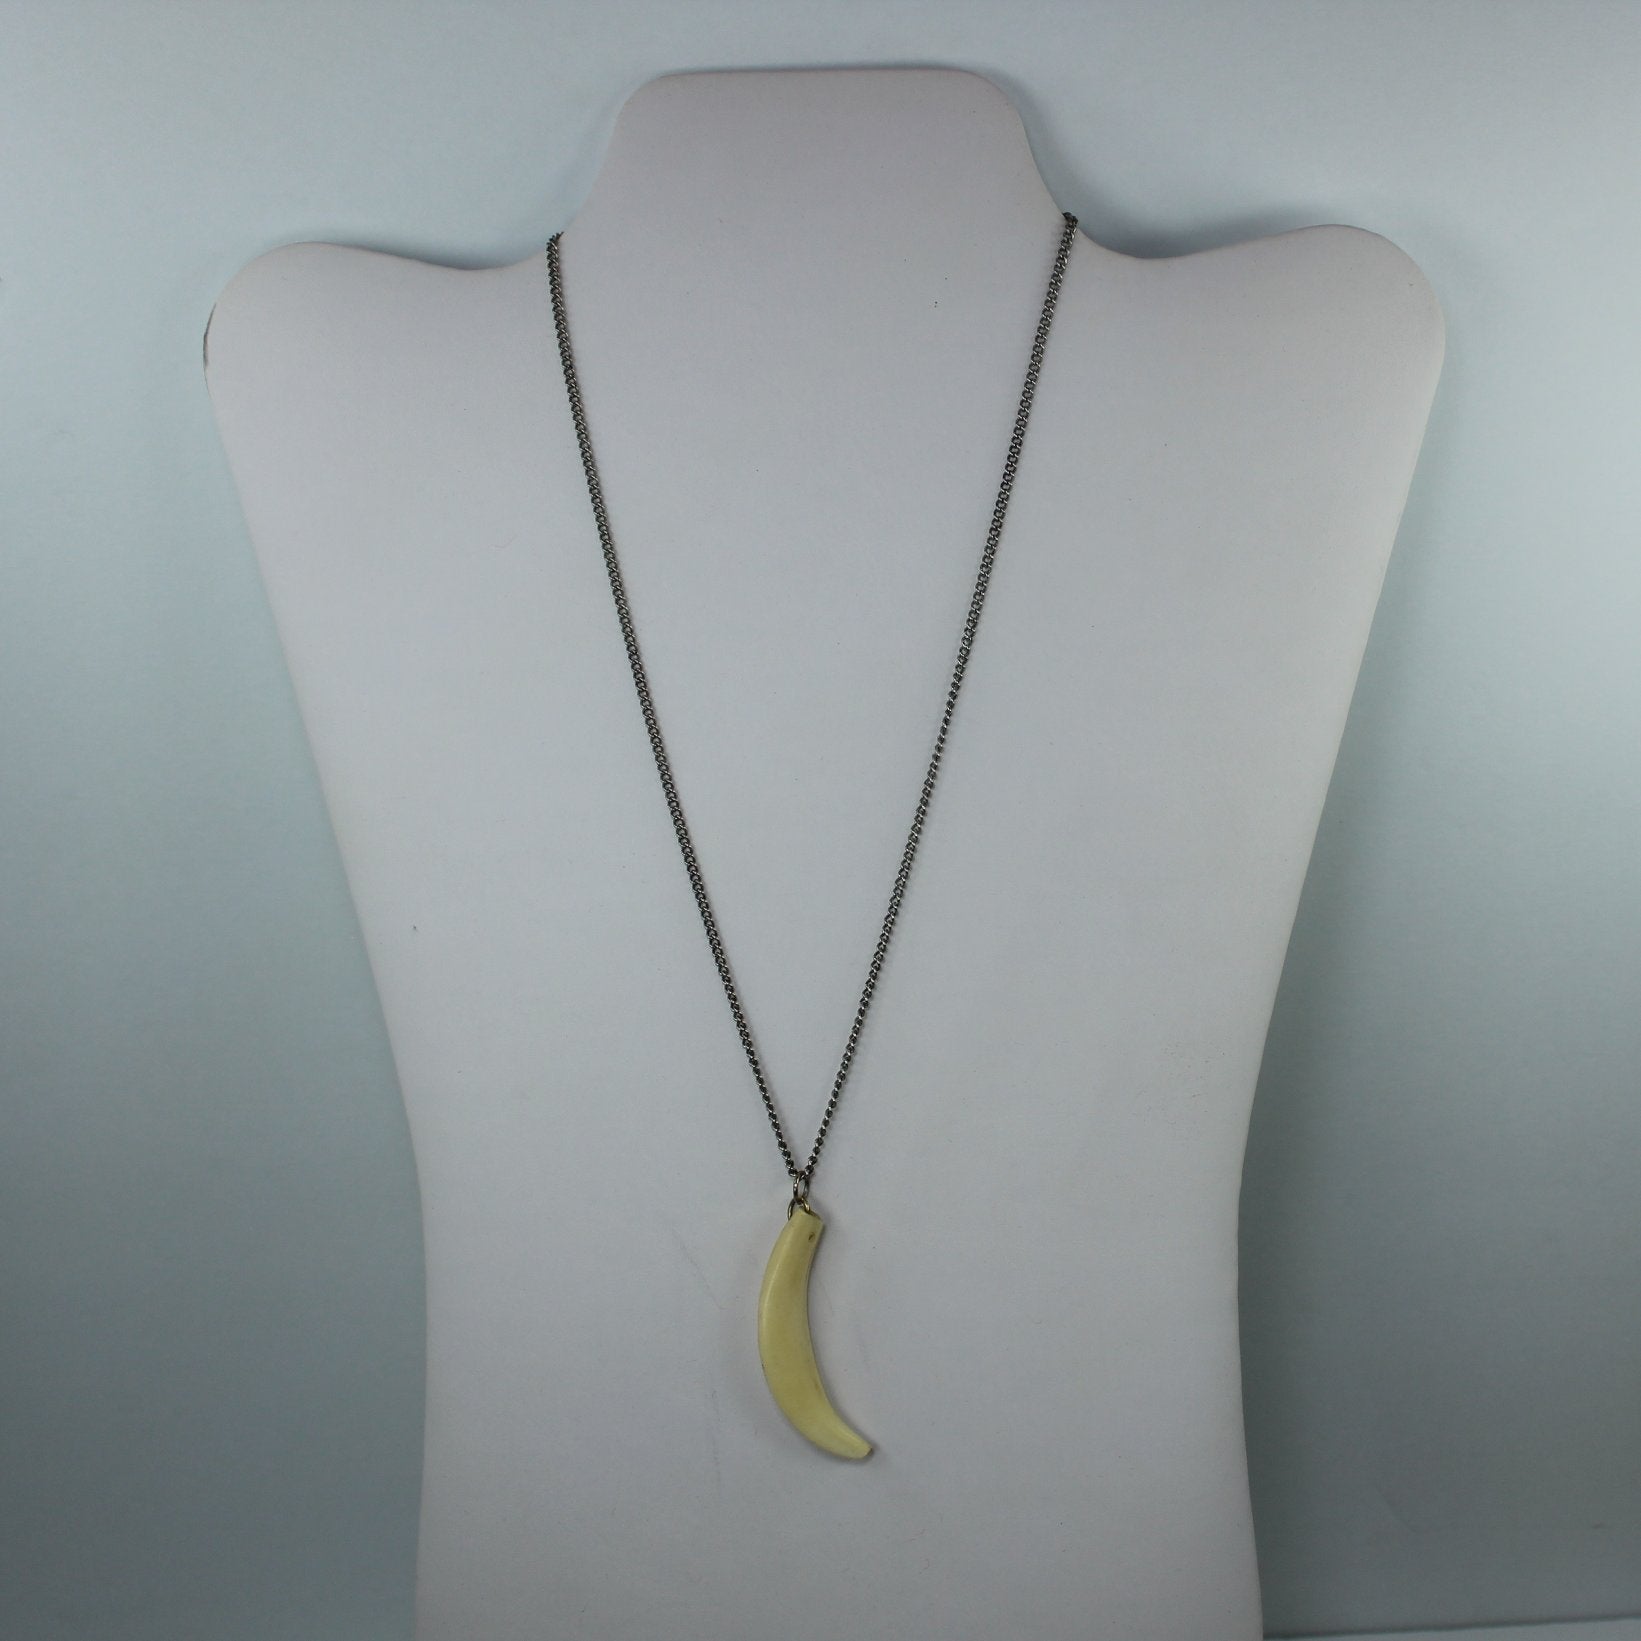 Chain Necklace Natural Bone Tooth as on neck view